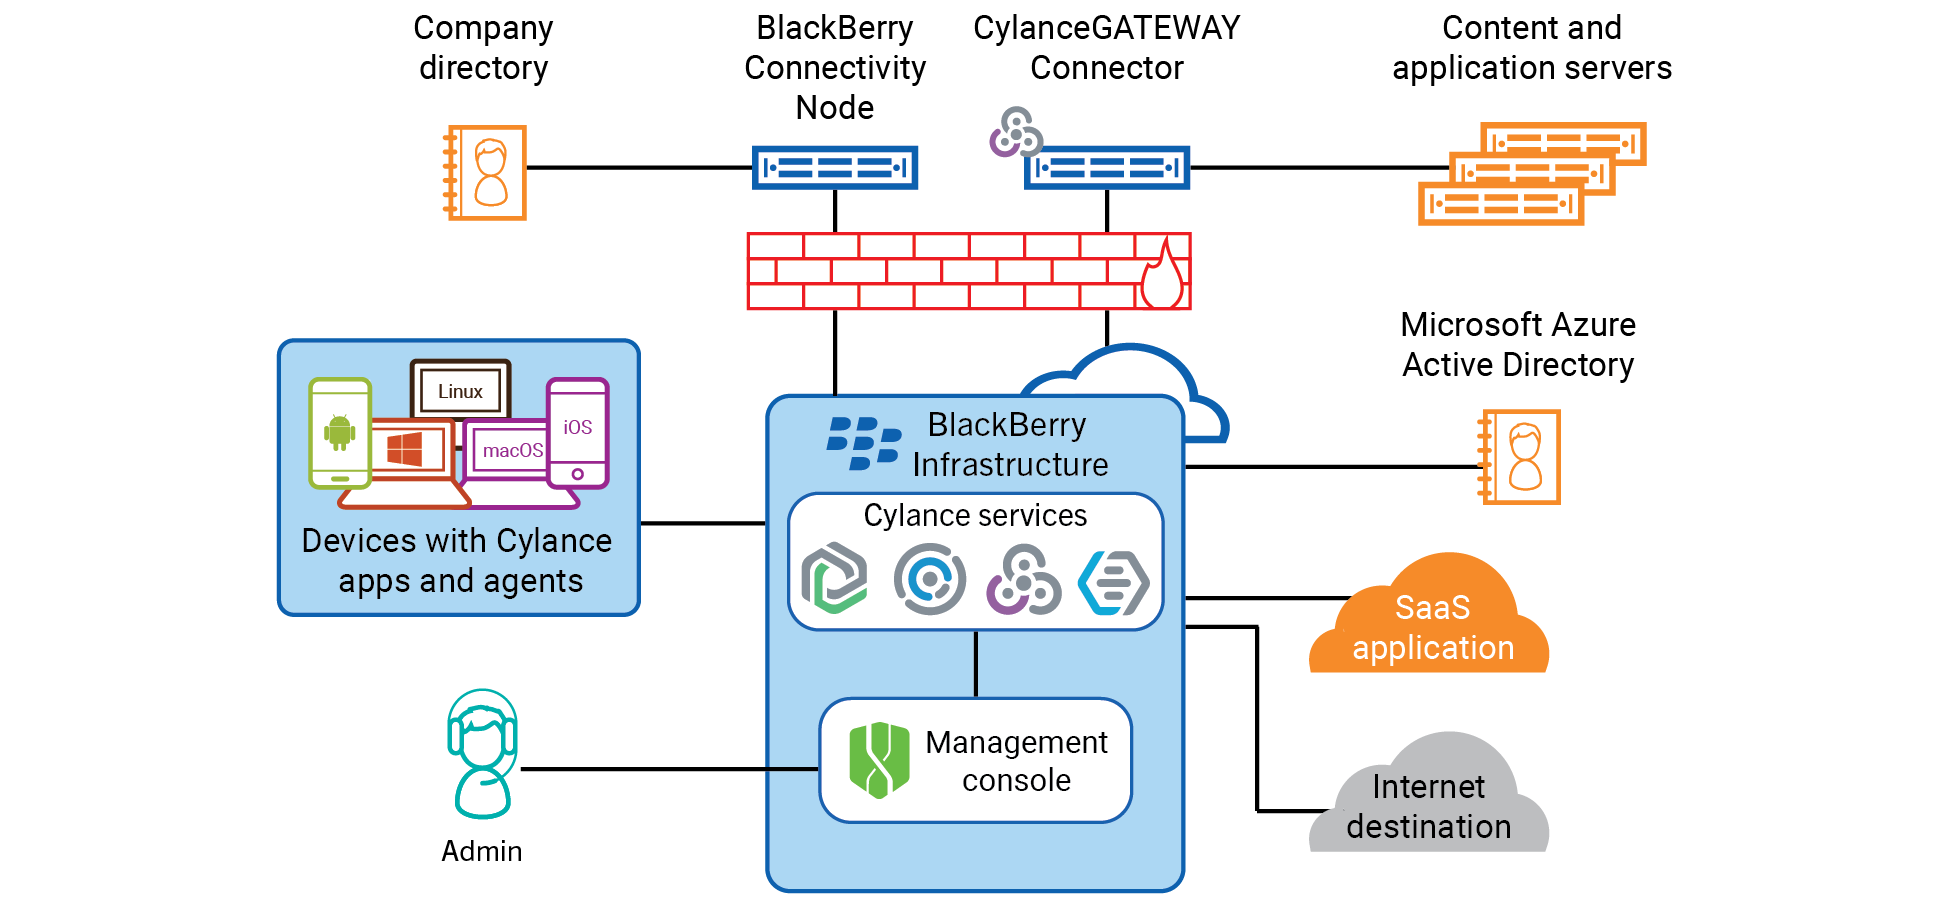 The full architecture of the Cylance Endpoint Security solution